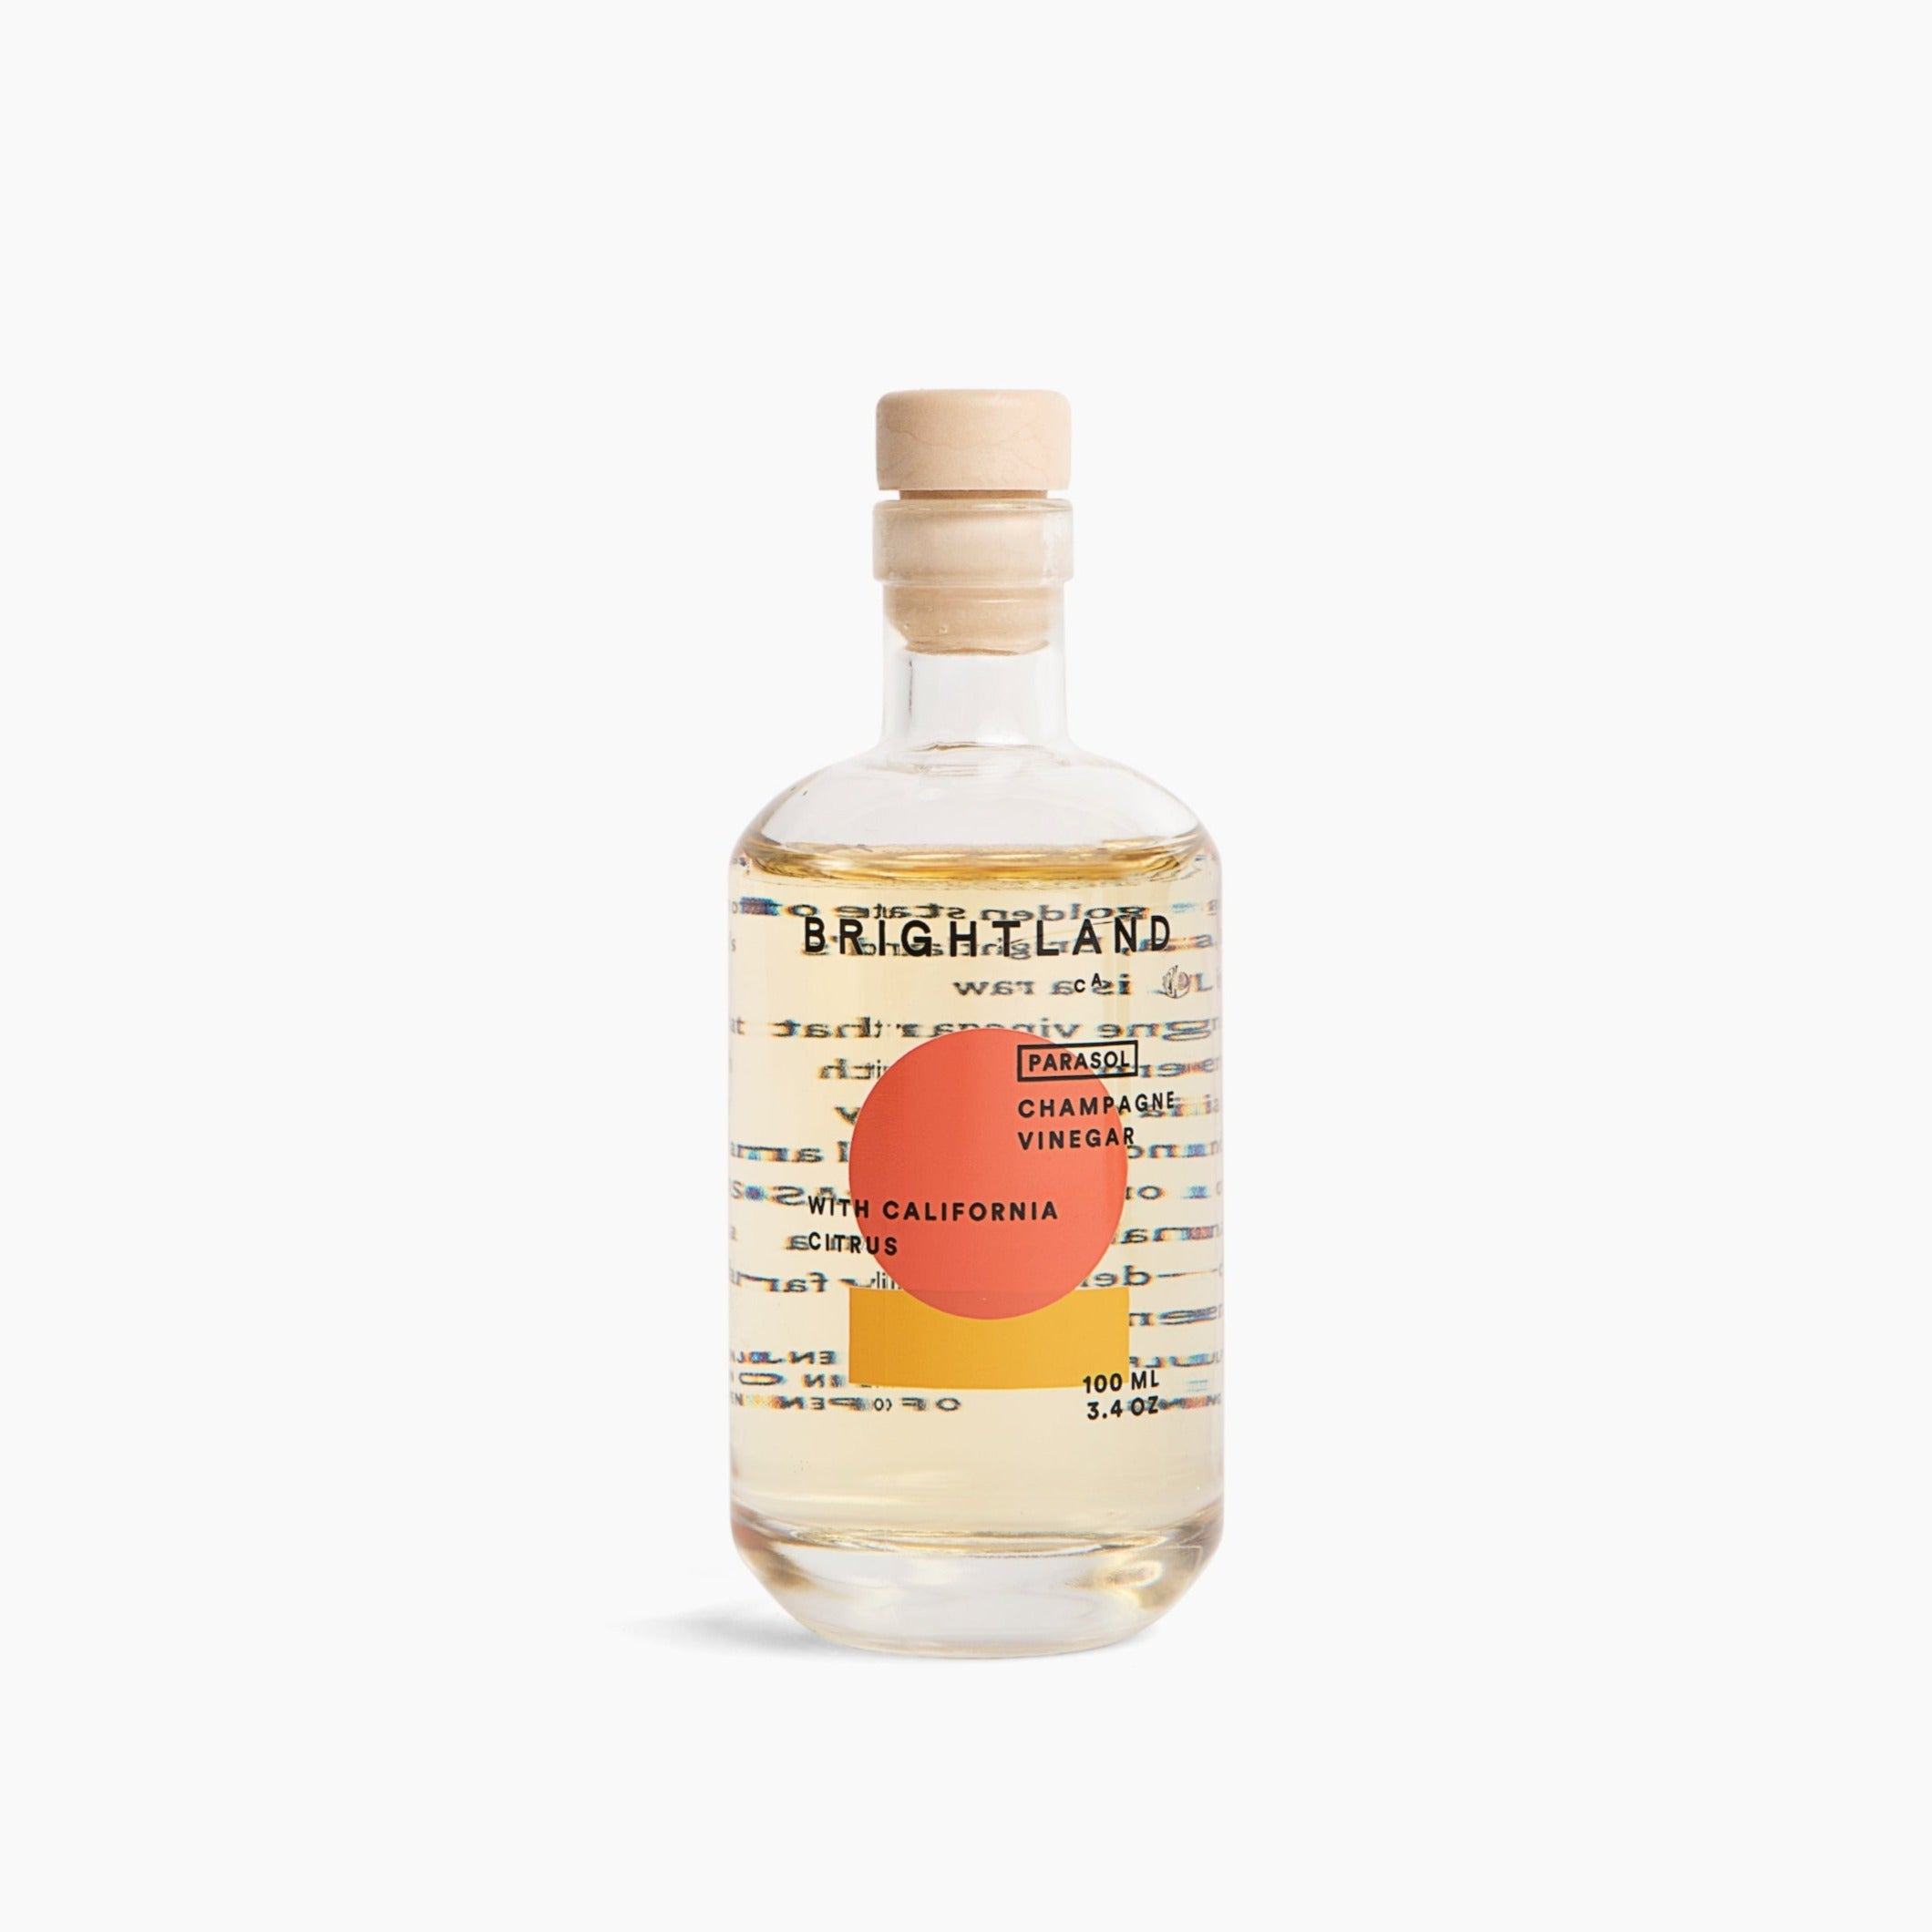 A clear glass bottle with orange and yellow geometric motifs with the following in black writing "BRIGHTLAND CA PARASOL CHAMPAGNE VINEGAR WITH CALIFORNIA CITRUS 100ML 3.4 OZ" photographed on white background.